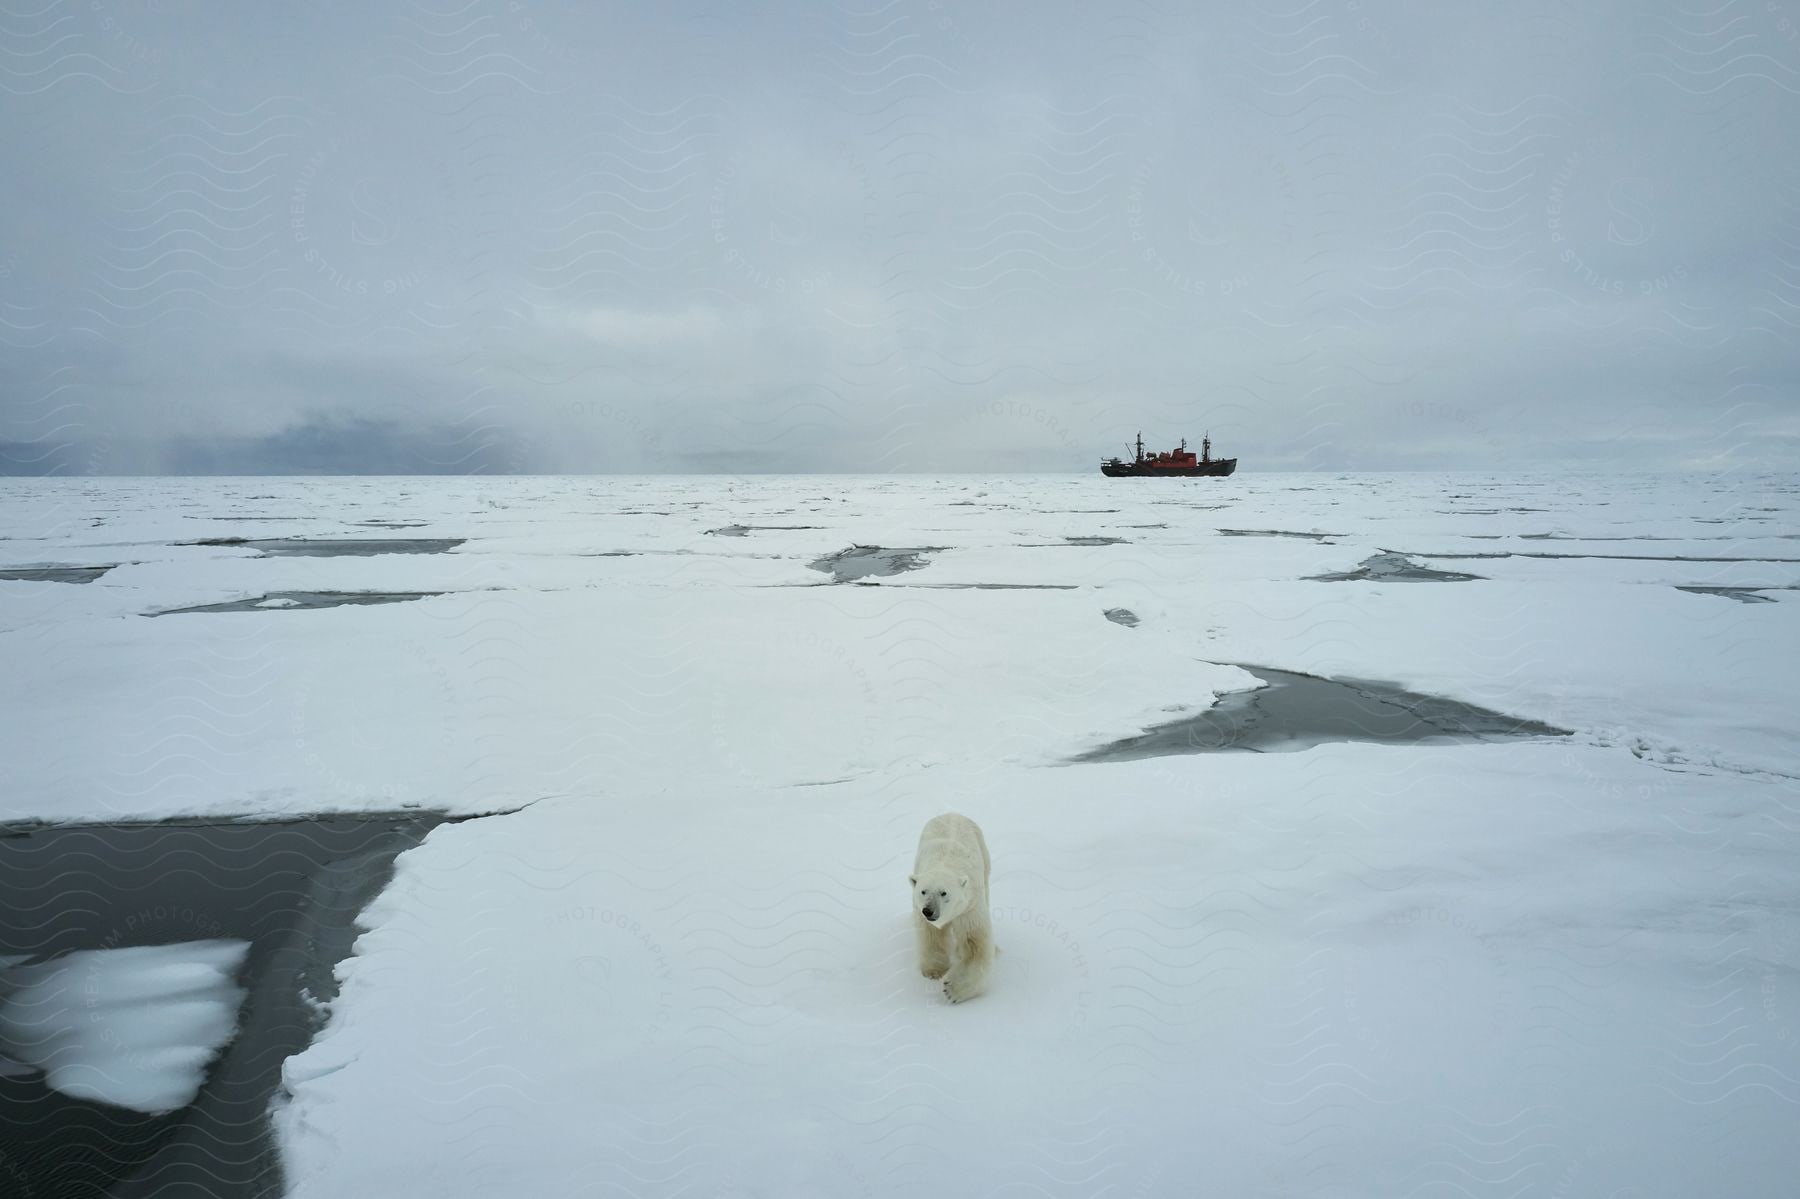 A polar bear walking on ice with a ship in the distance